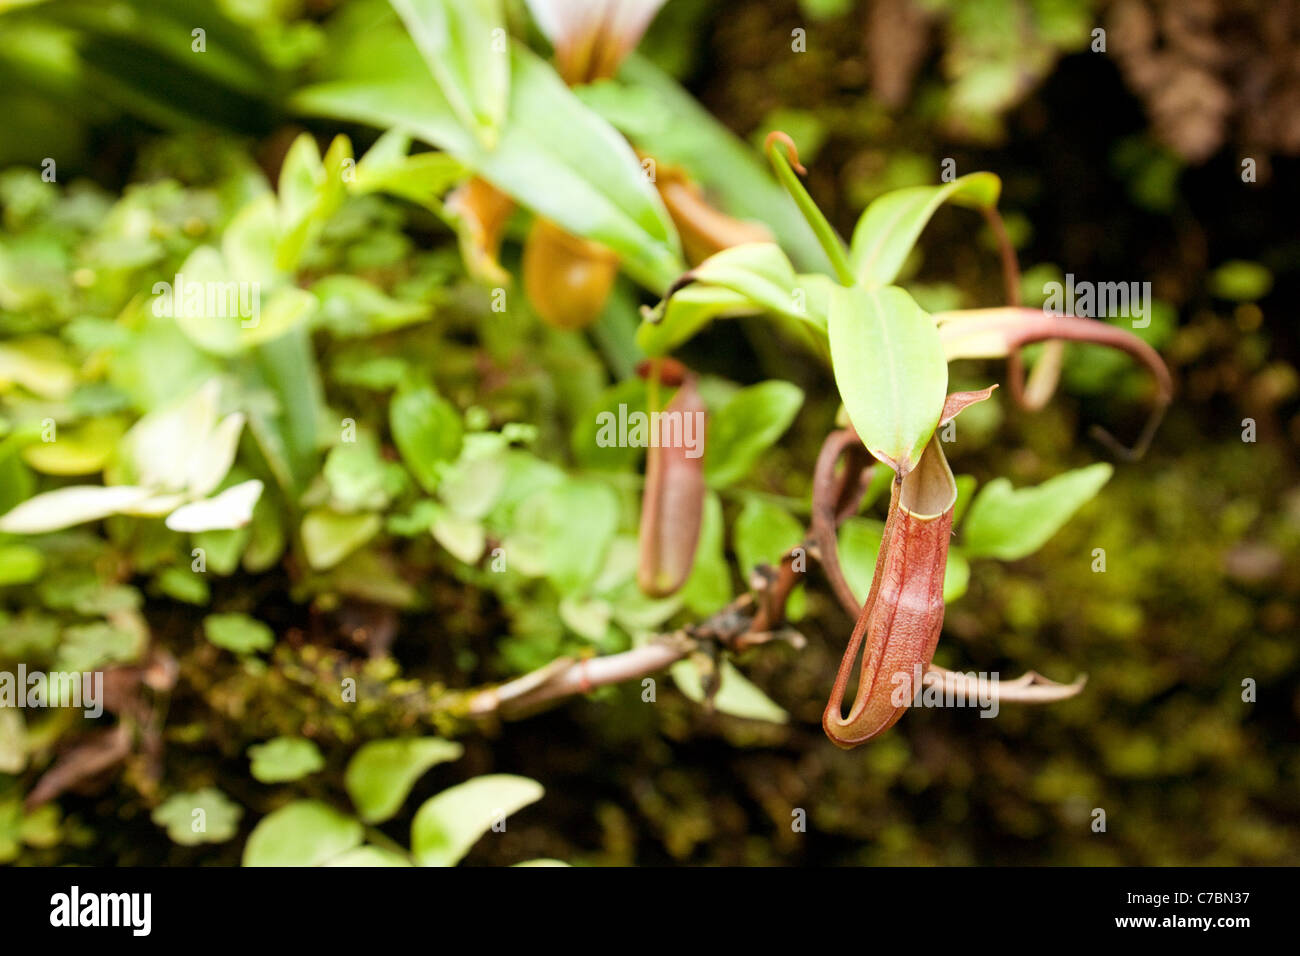 Pitcher plant, an insect eating plant, Asia Stock Photo